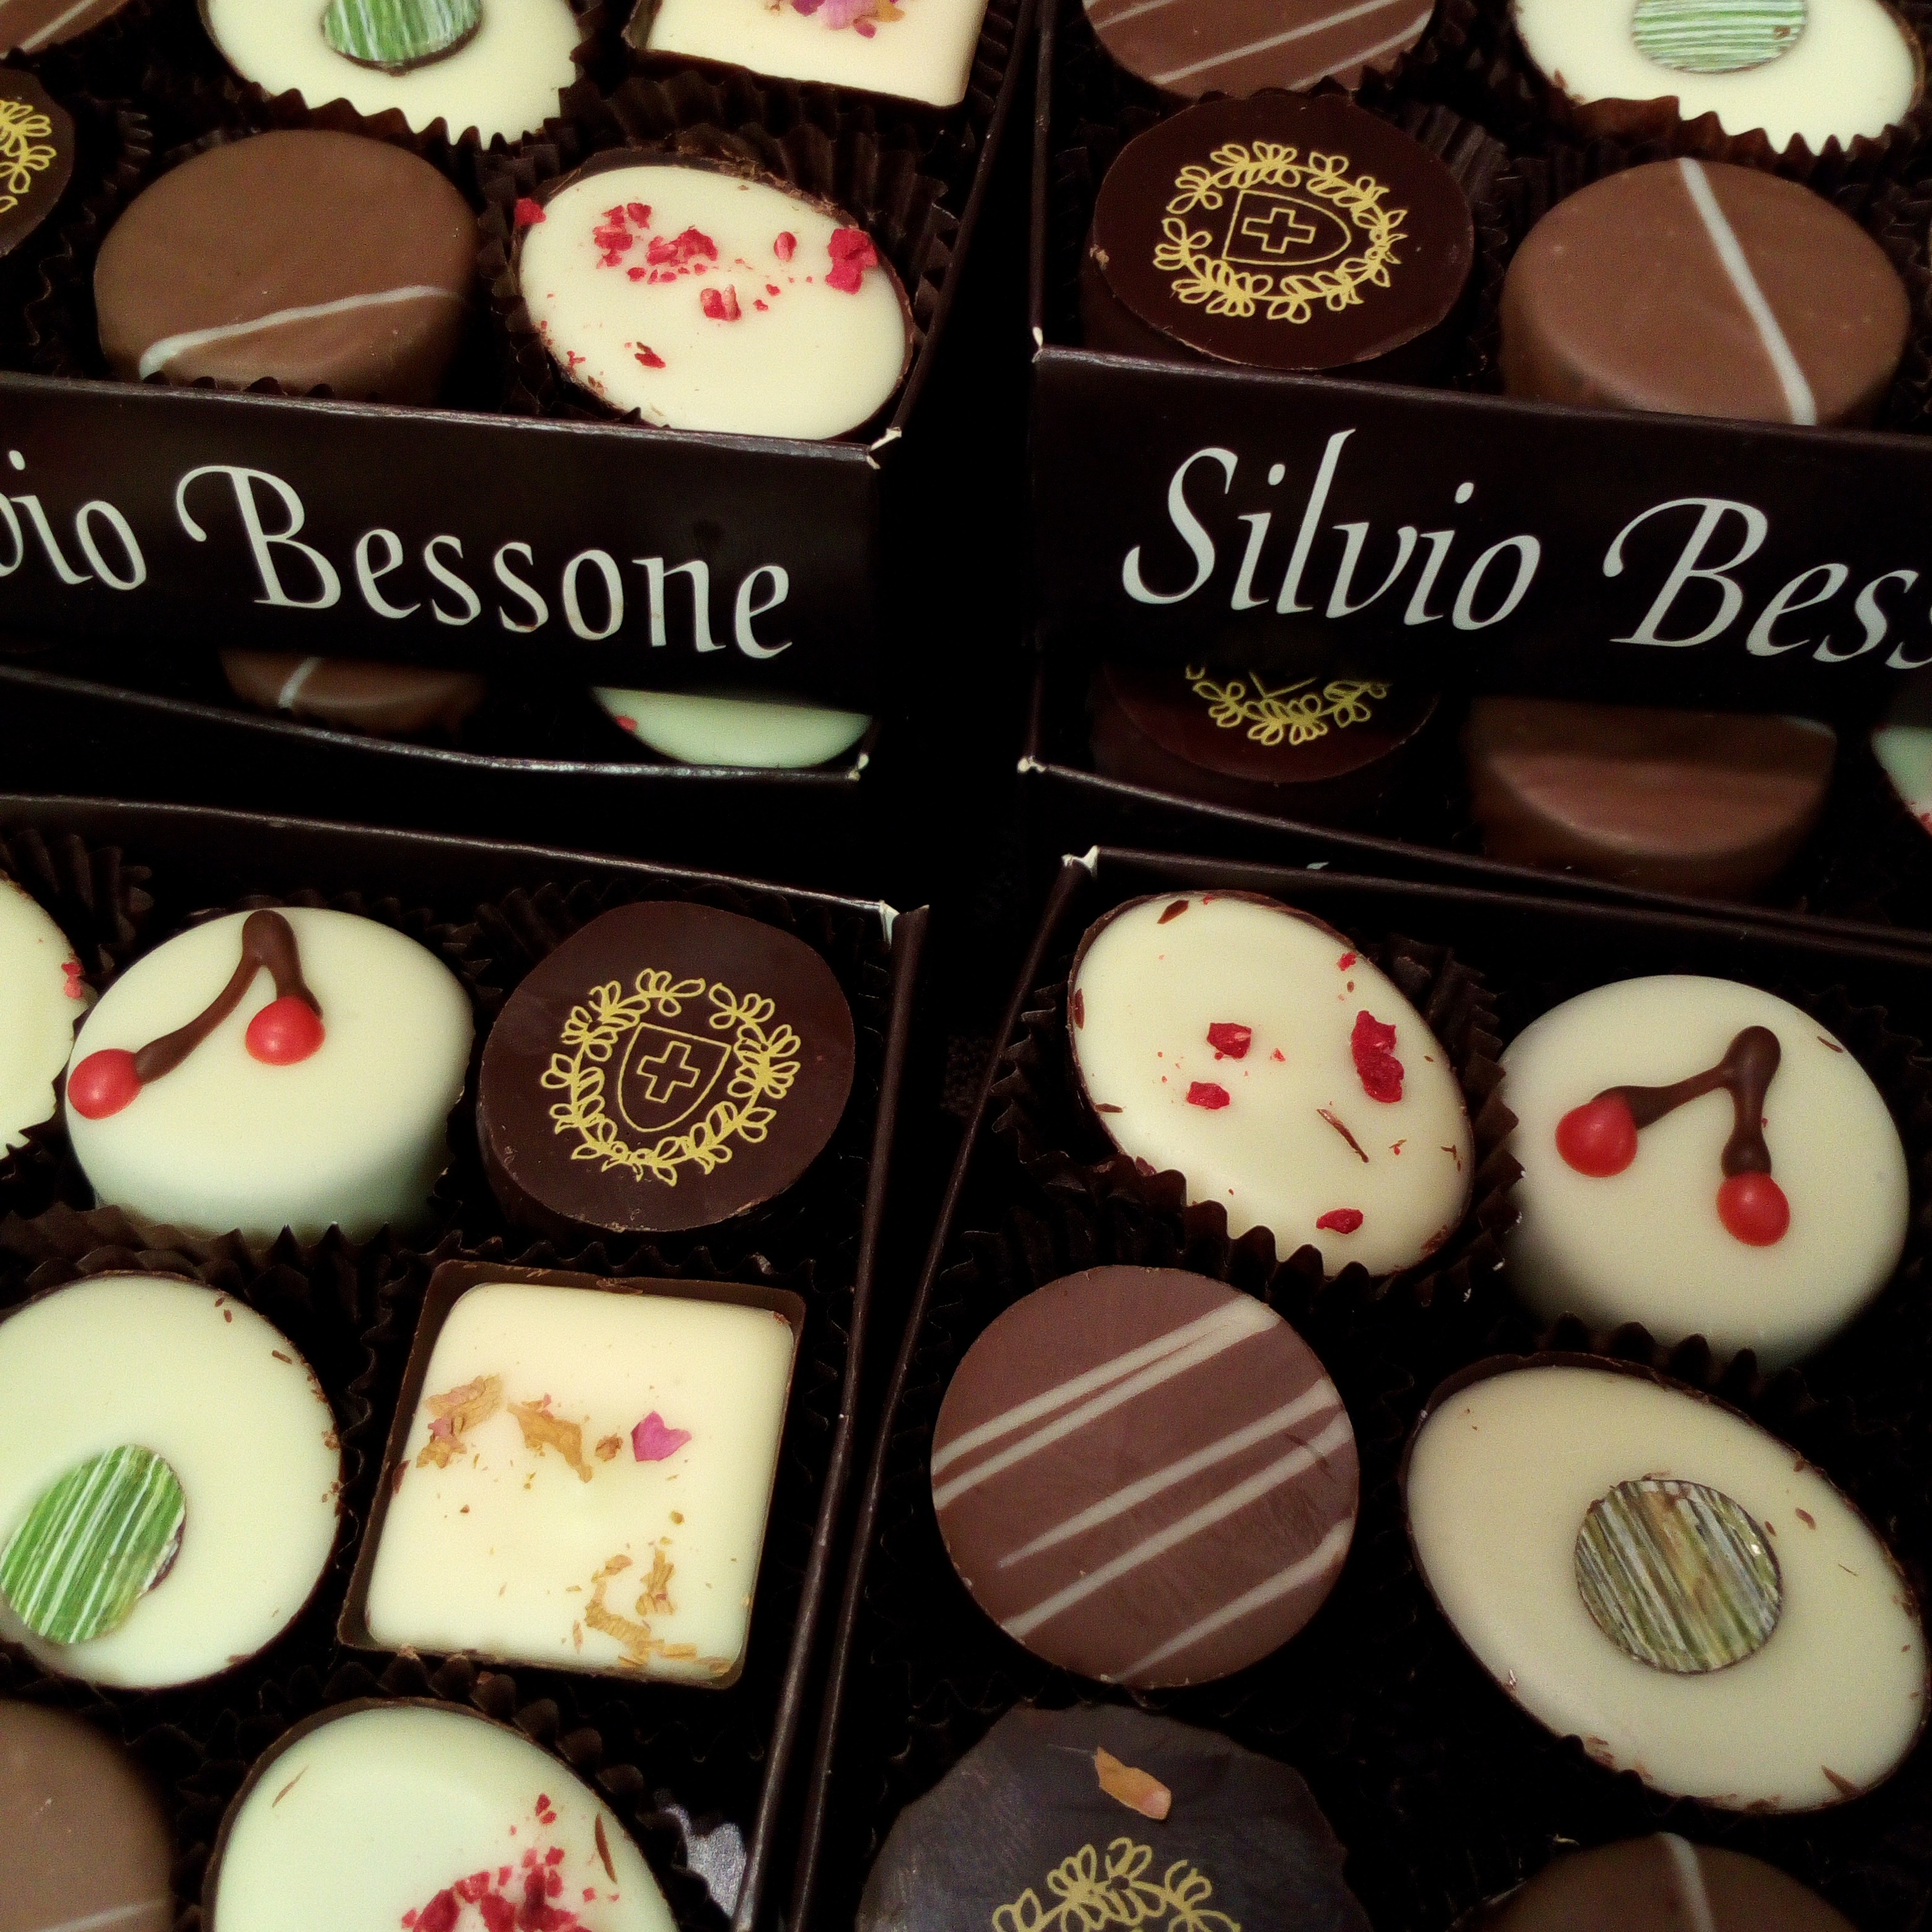 Silvio Bessone presents the new collection of Chocolates for 2019.